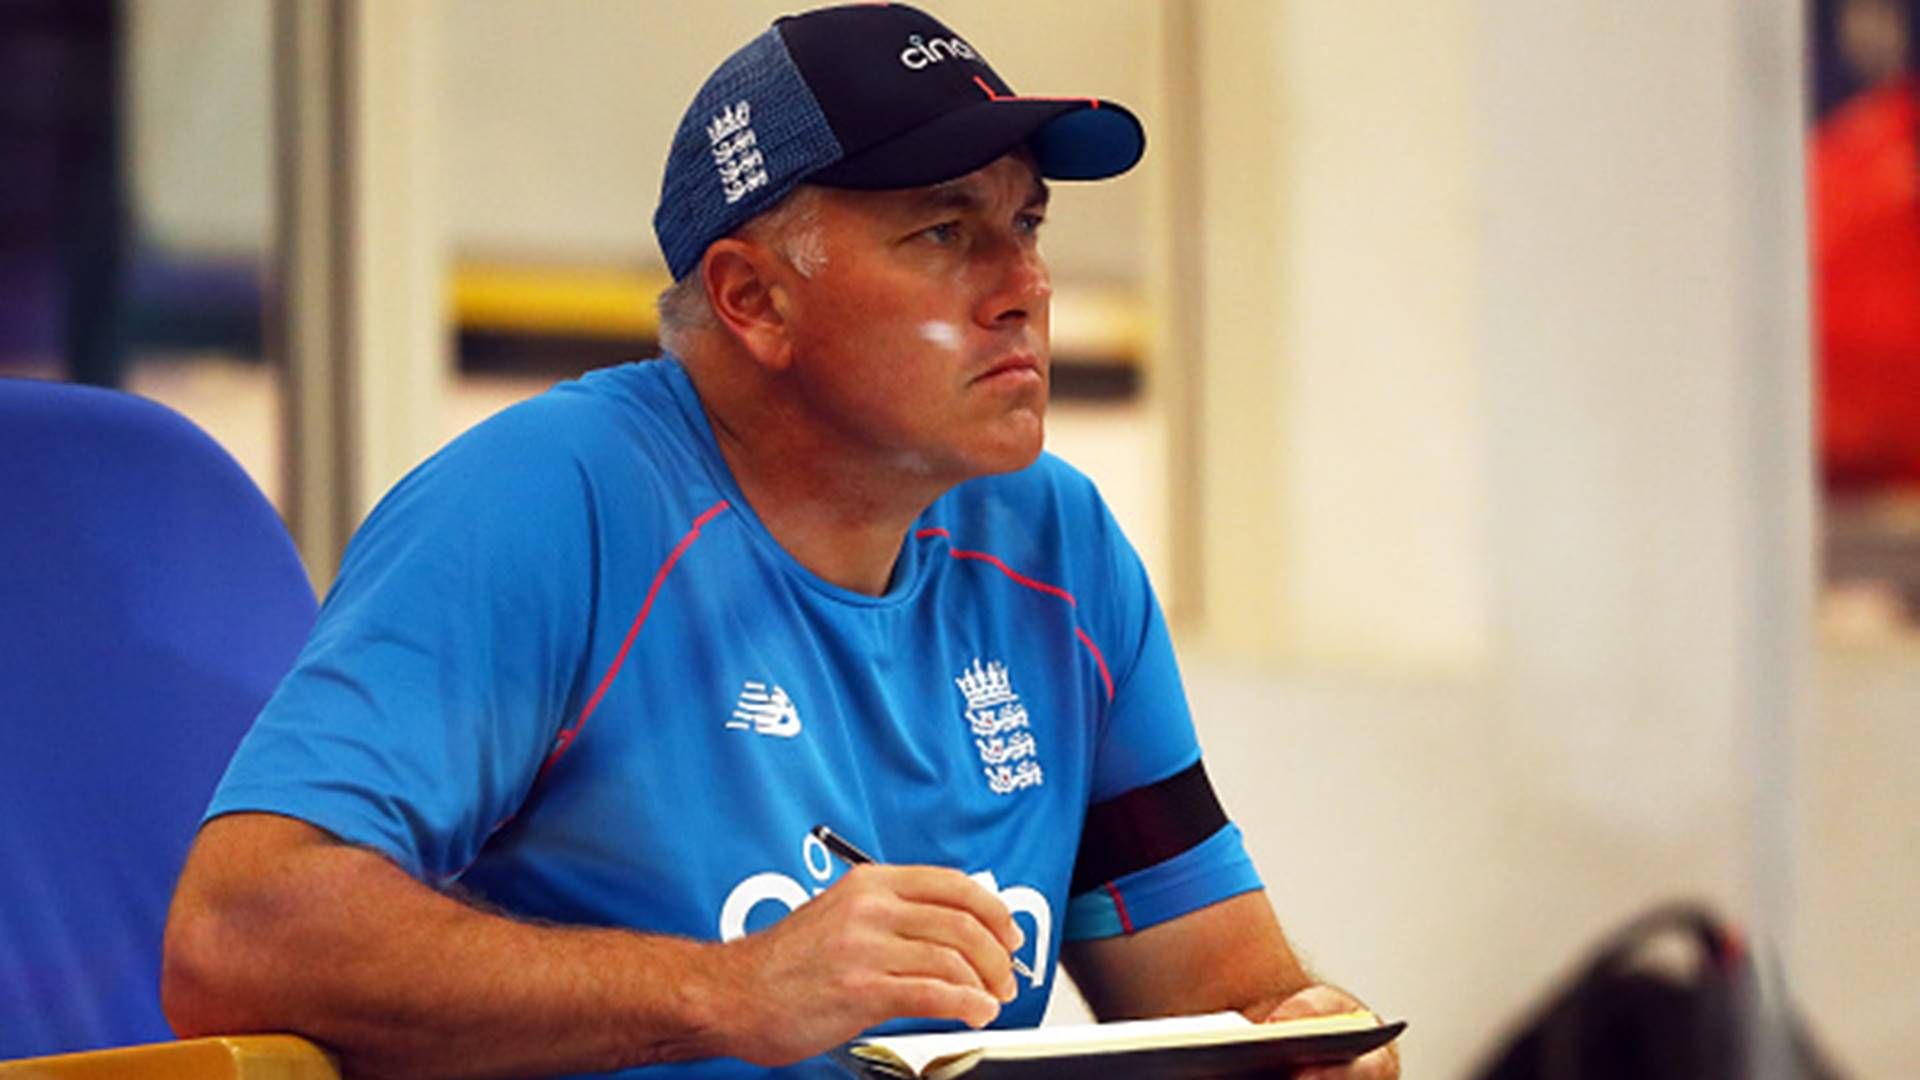 England head coach Chris Silverwood steps down after Ashes humiliation